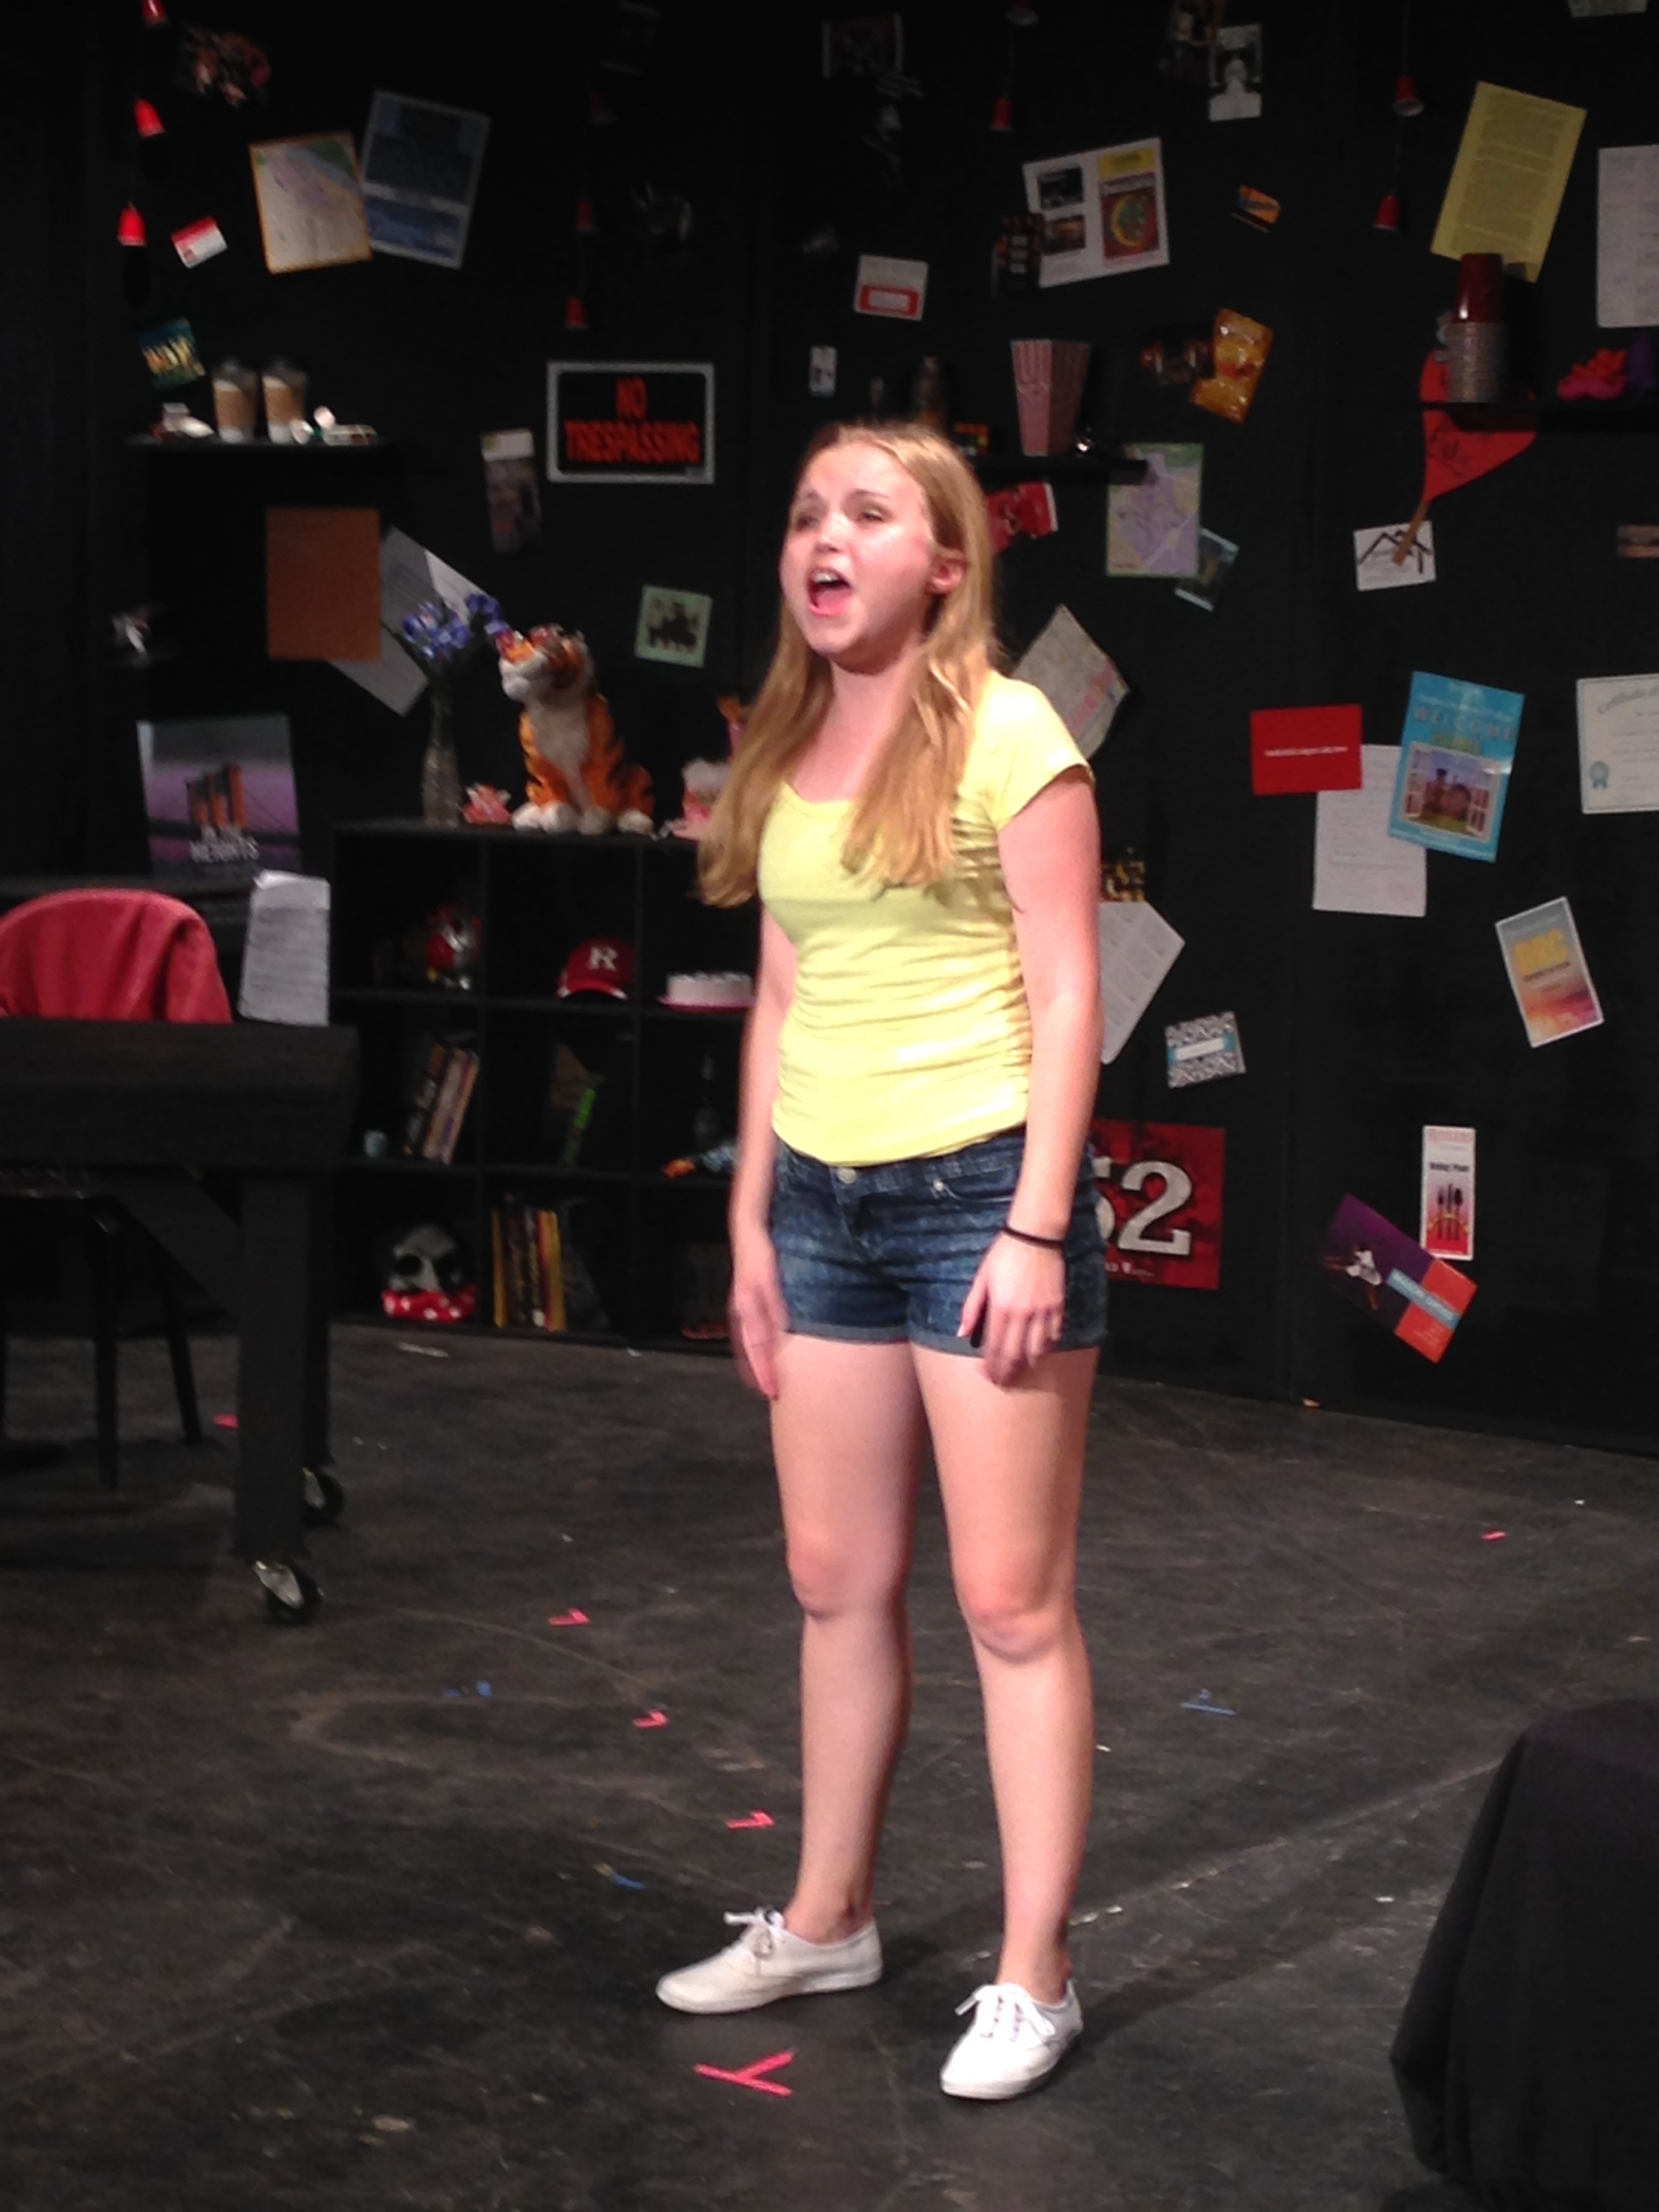  Megan Kalberer performing "Middle of a Moment" from  James and the Giant Peach  